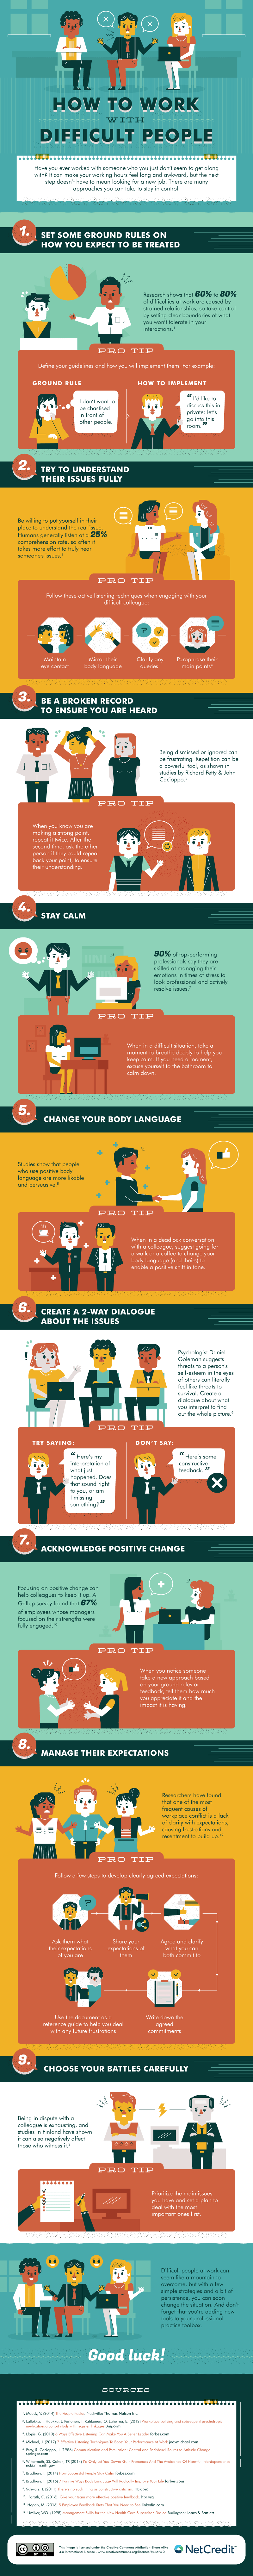 [Infographic] How To Create A Better Work Atmosphere By Defusing Difficult Colleagues